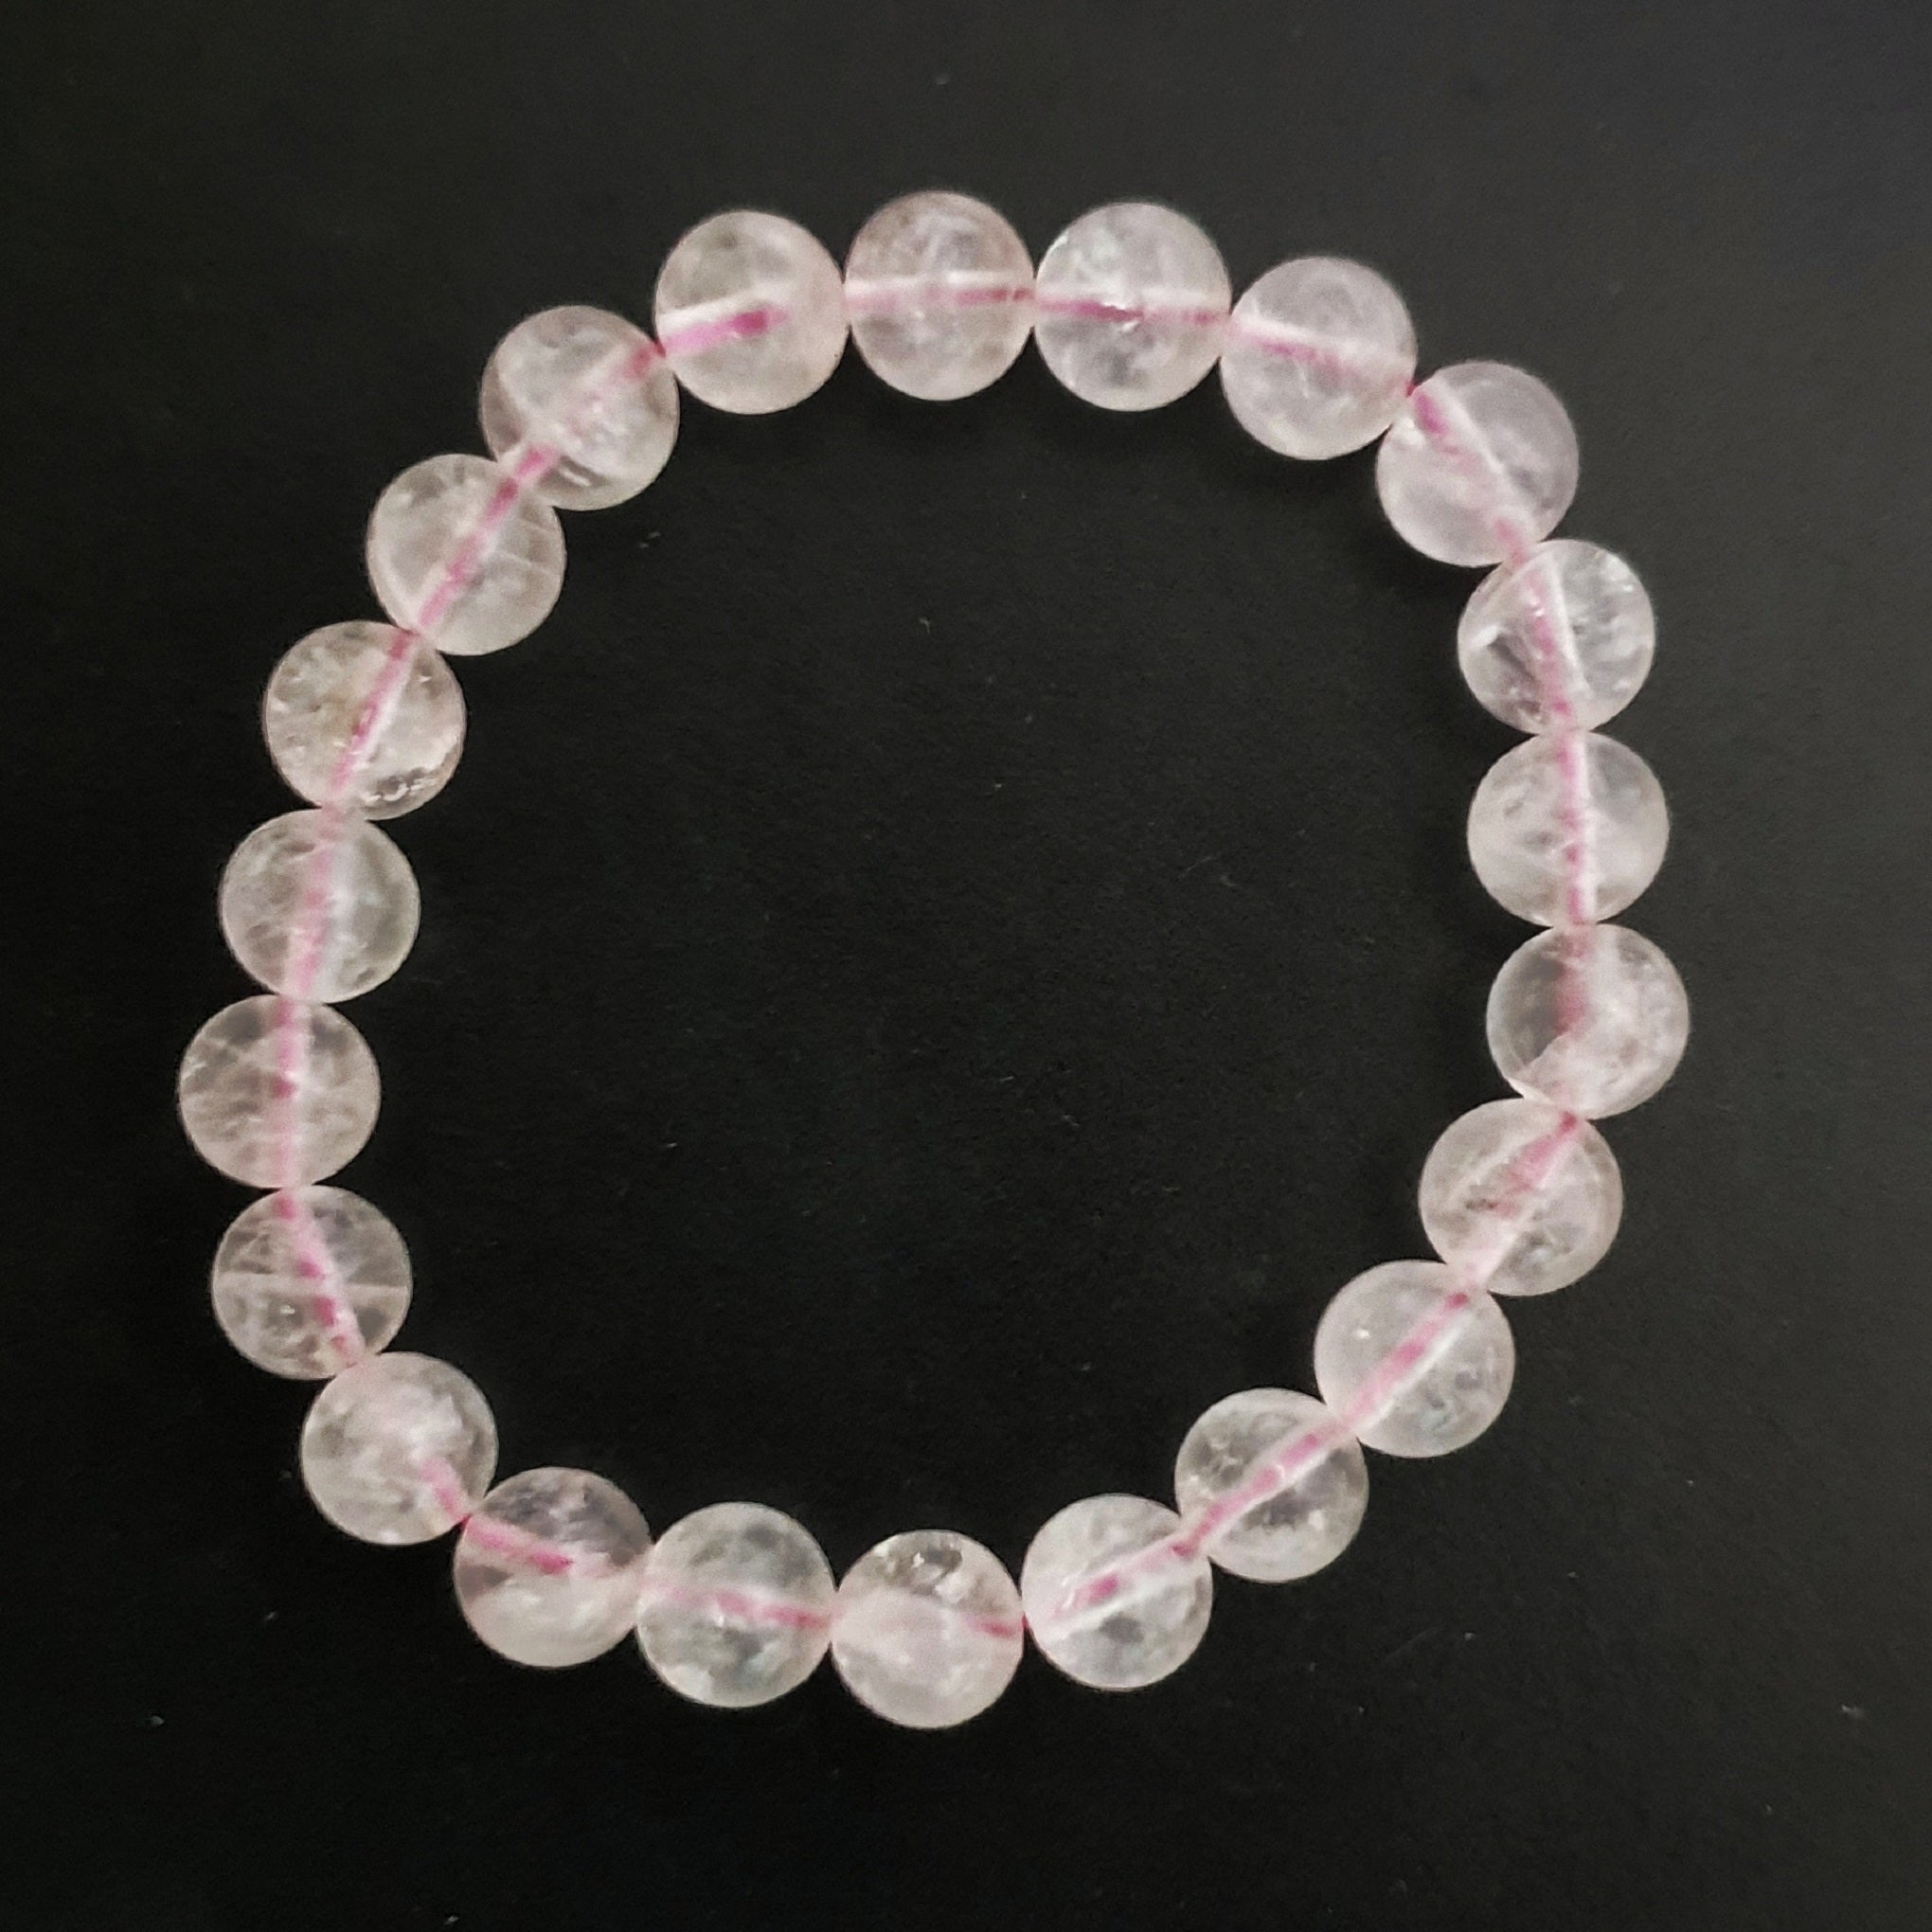 CERTIFIED ROSE QUARTZ CRYSTAL BRACELET - PINK COLOUR MEDITATION HEALING ACCESSORY HOME OFFICE GIFT JEWELLERY